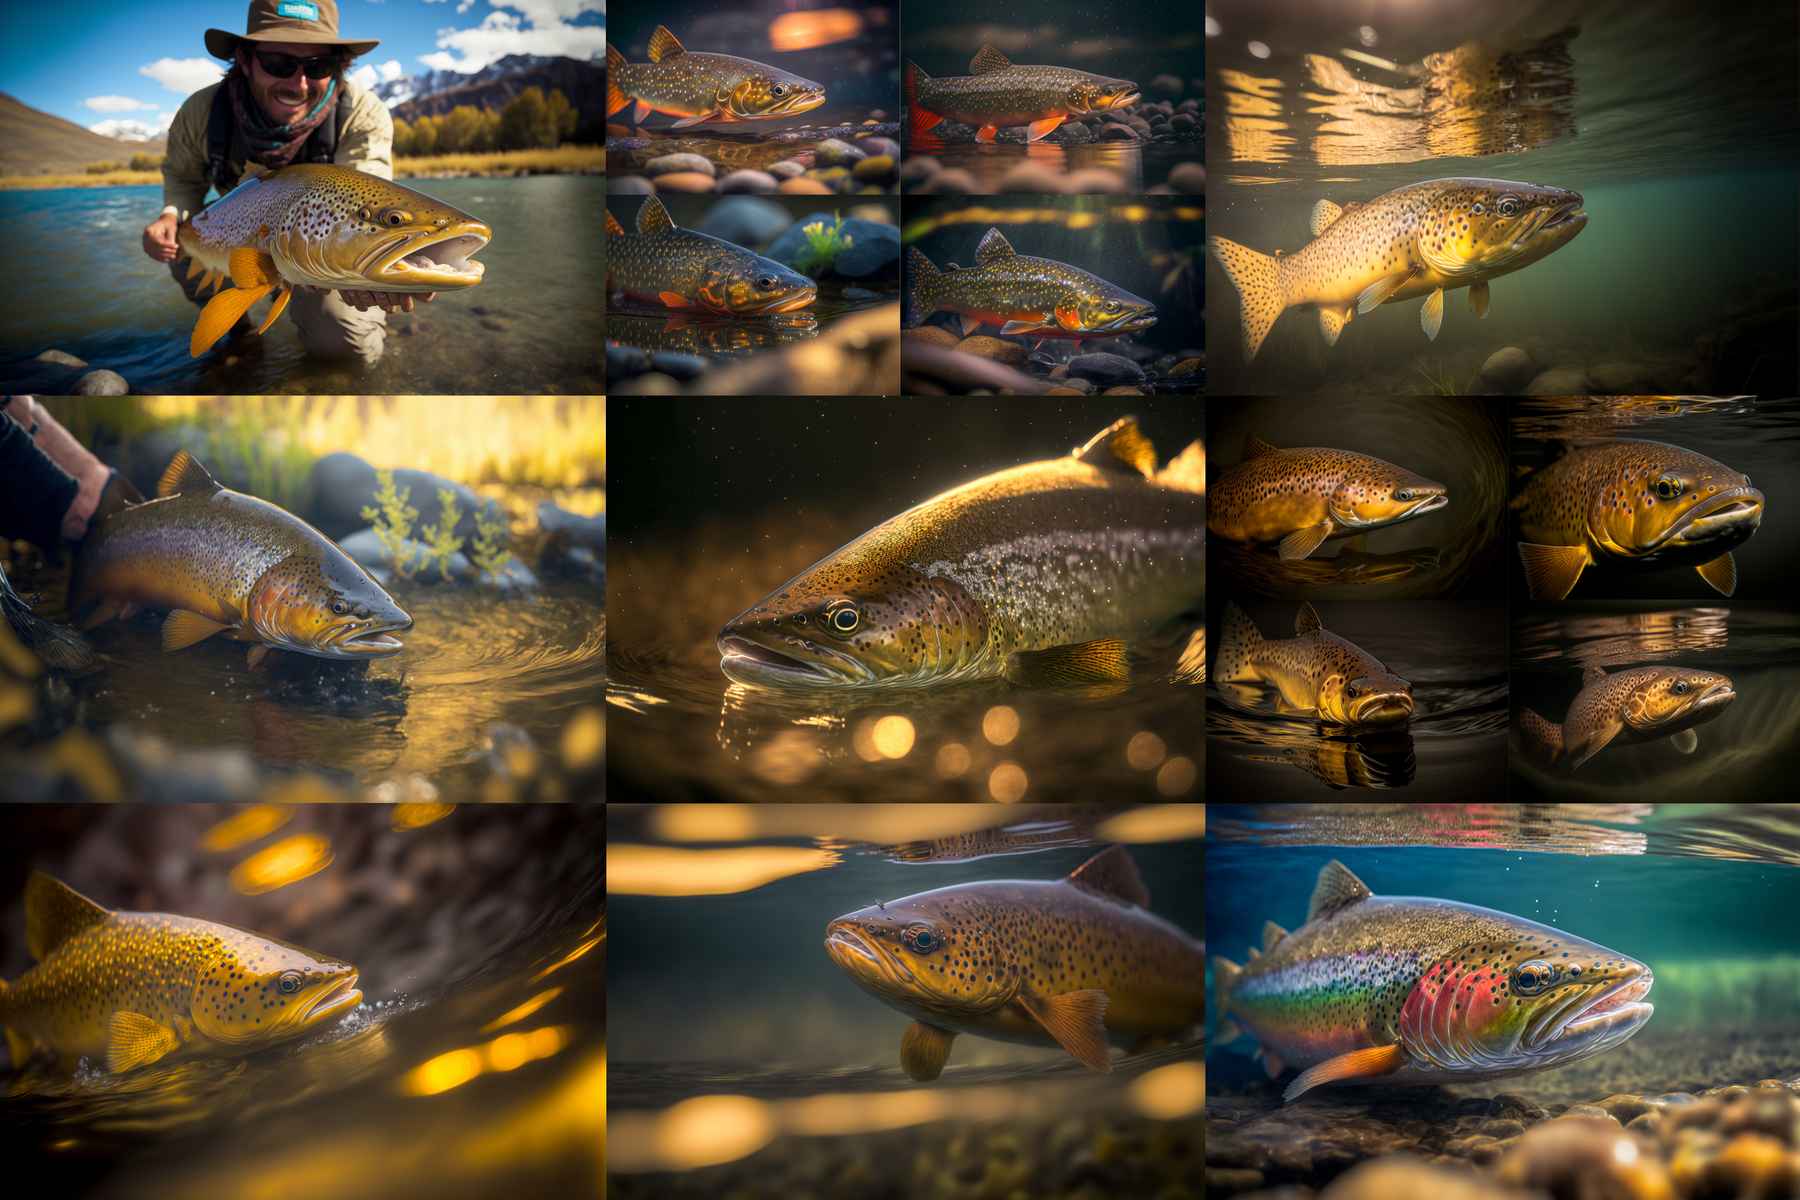 http://www.hatchmag.com/sites/default/files/styles/extra-large/public/fakefish3.jpg